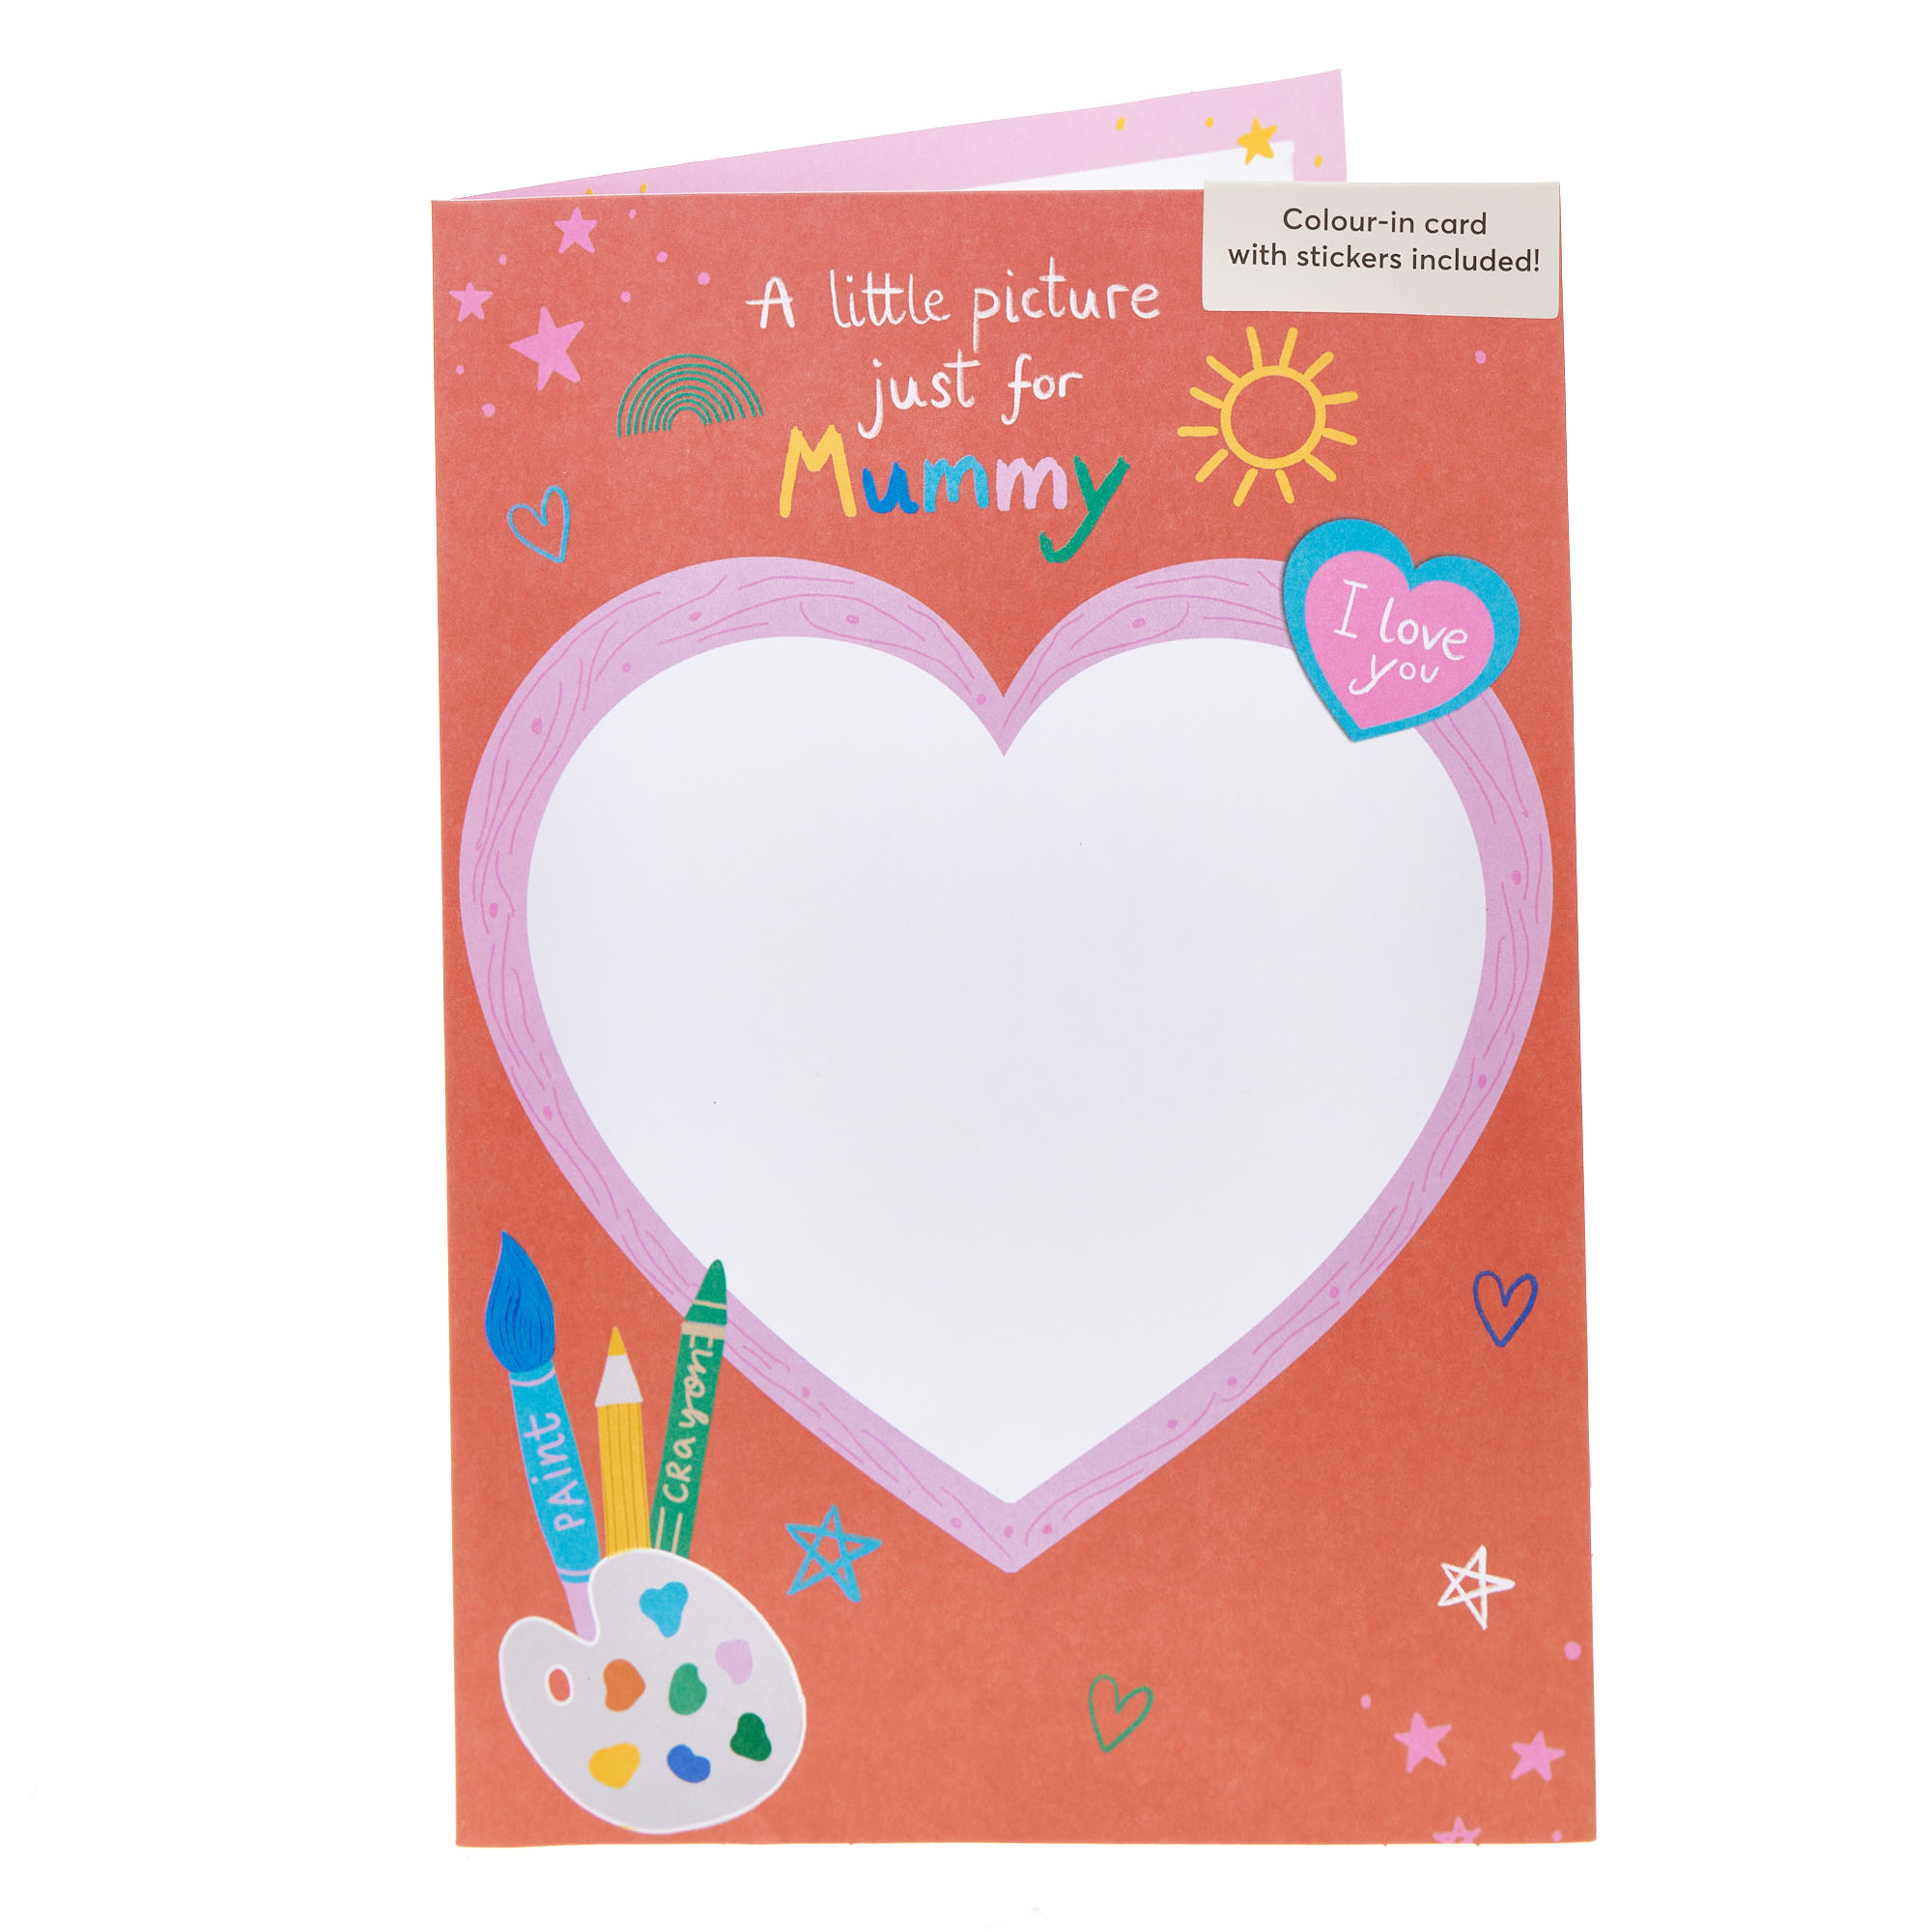 Mummy Colour-In Valentine's Day Card With Stickers